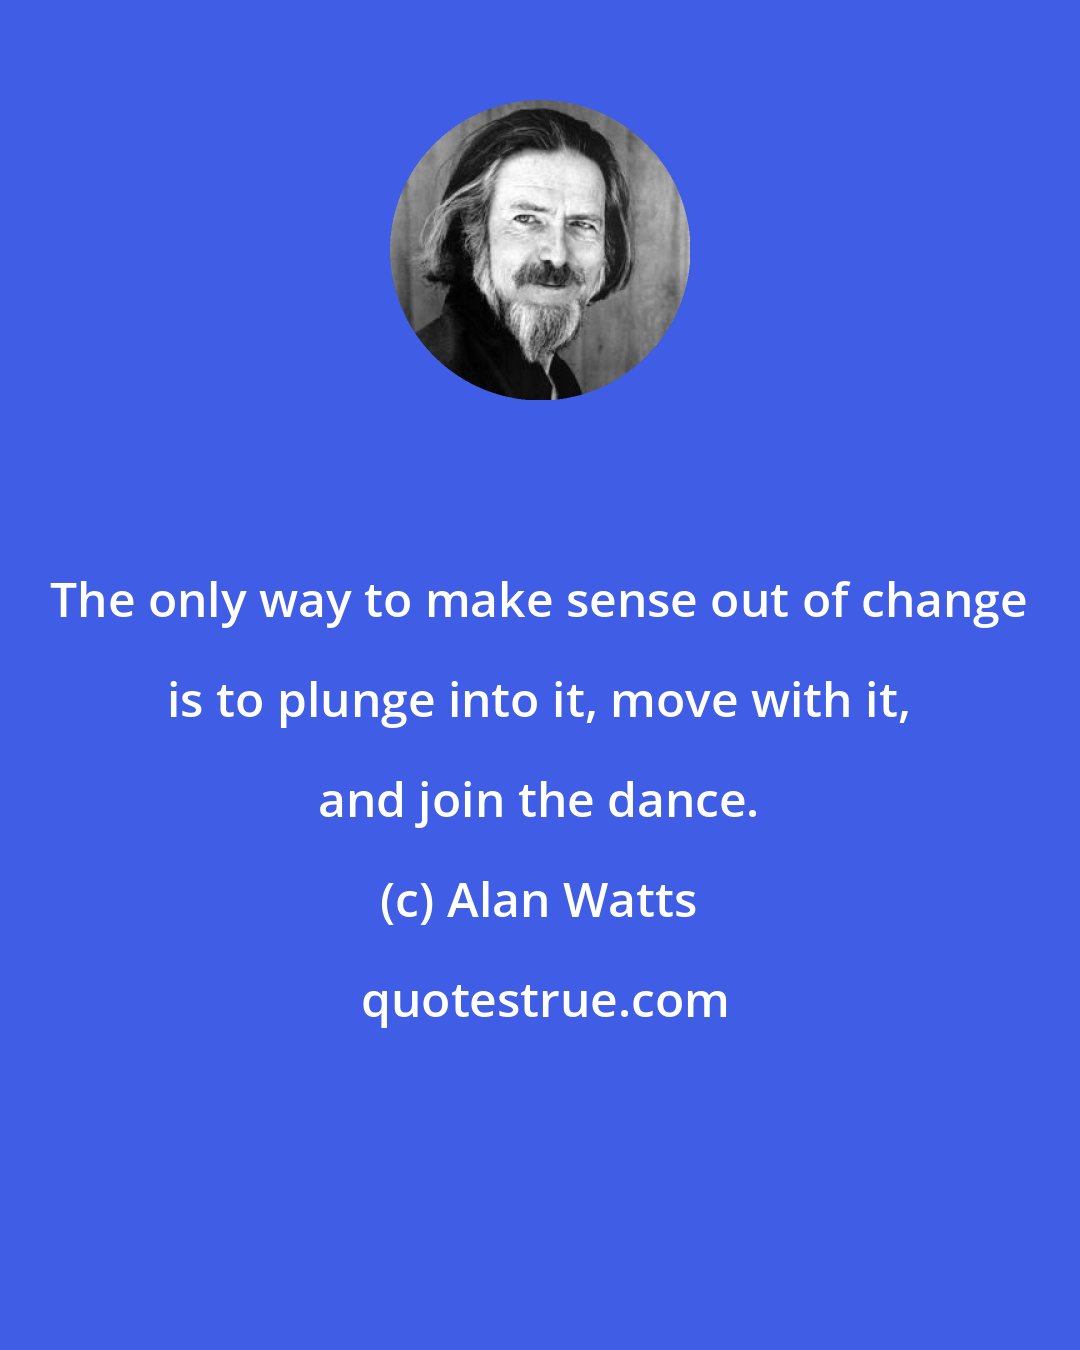 Alan Watts: The only way to make sense out of change is to plunge into it, move with it, and join the dance.